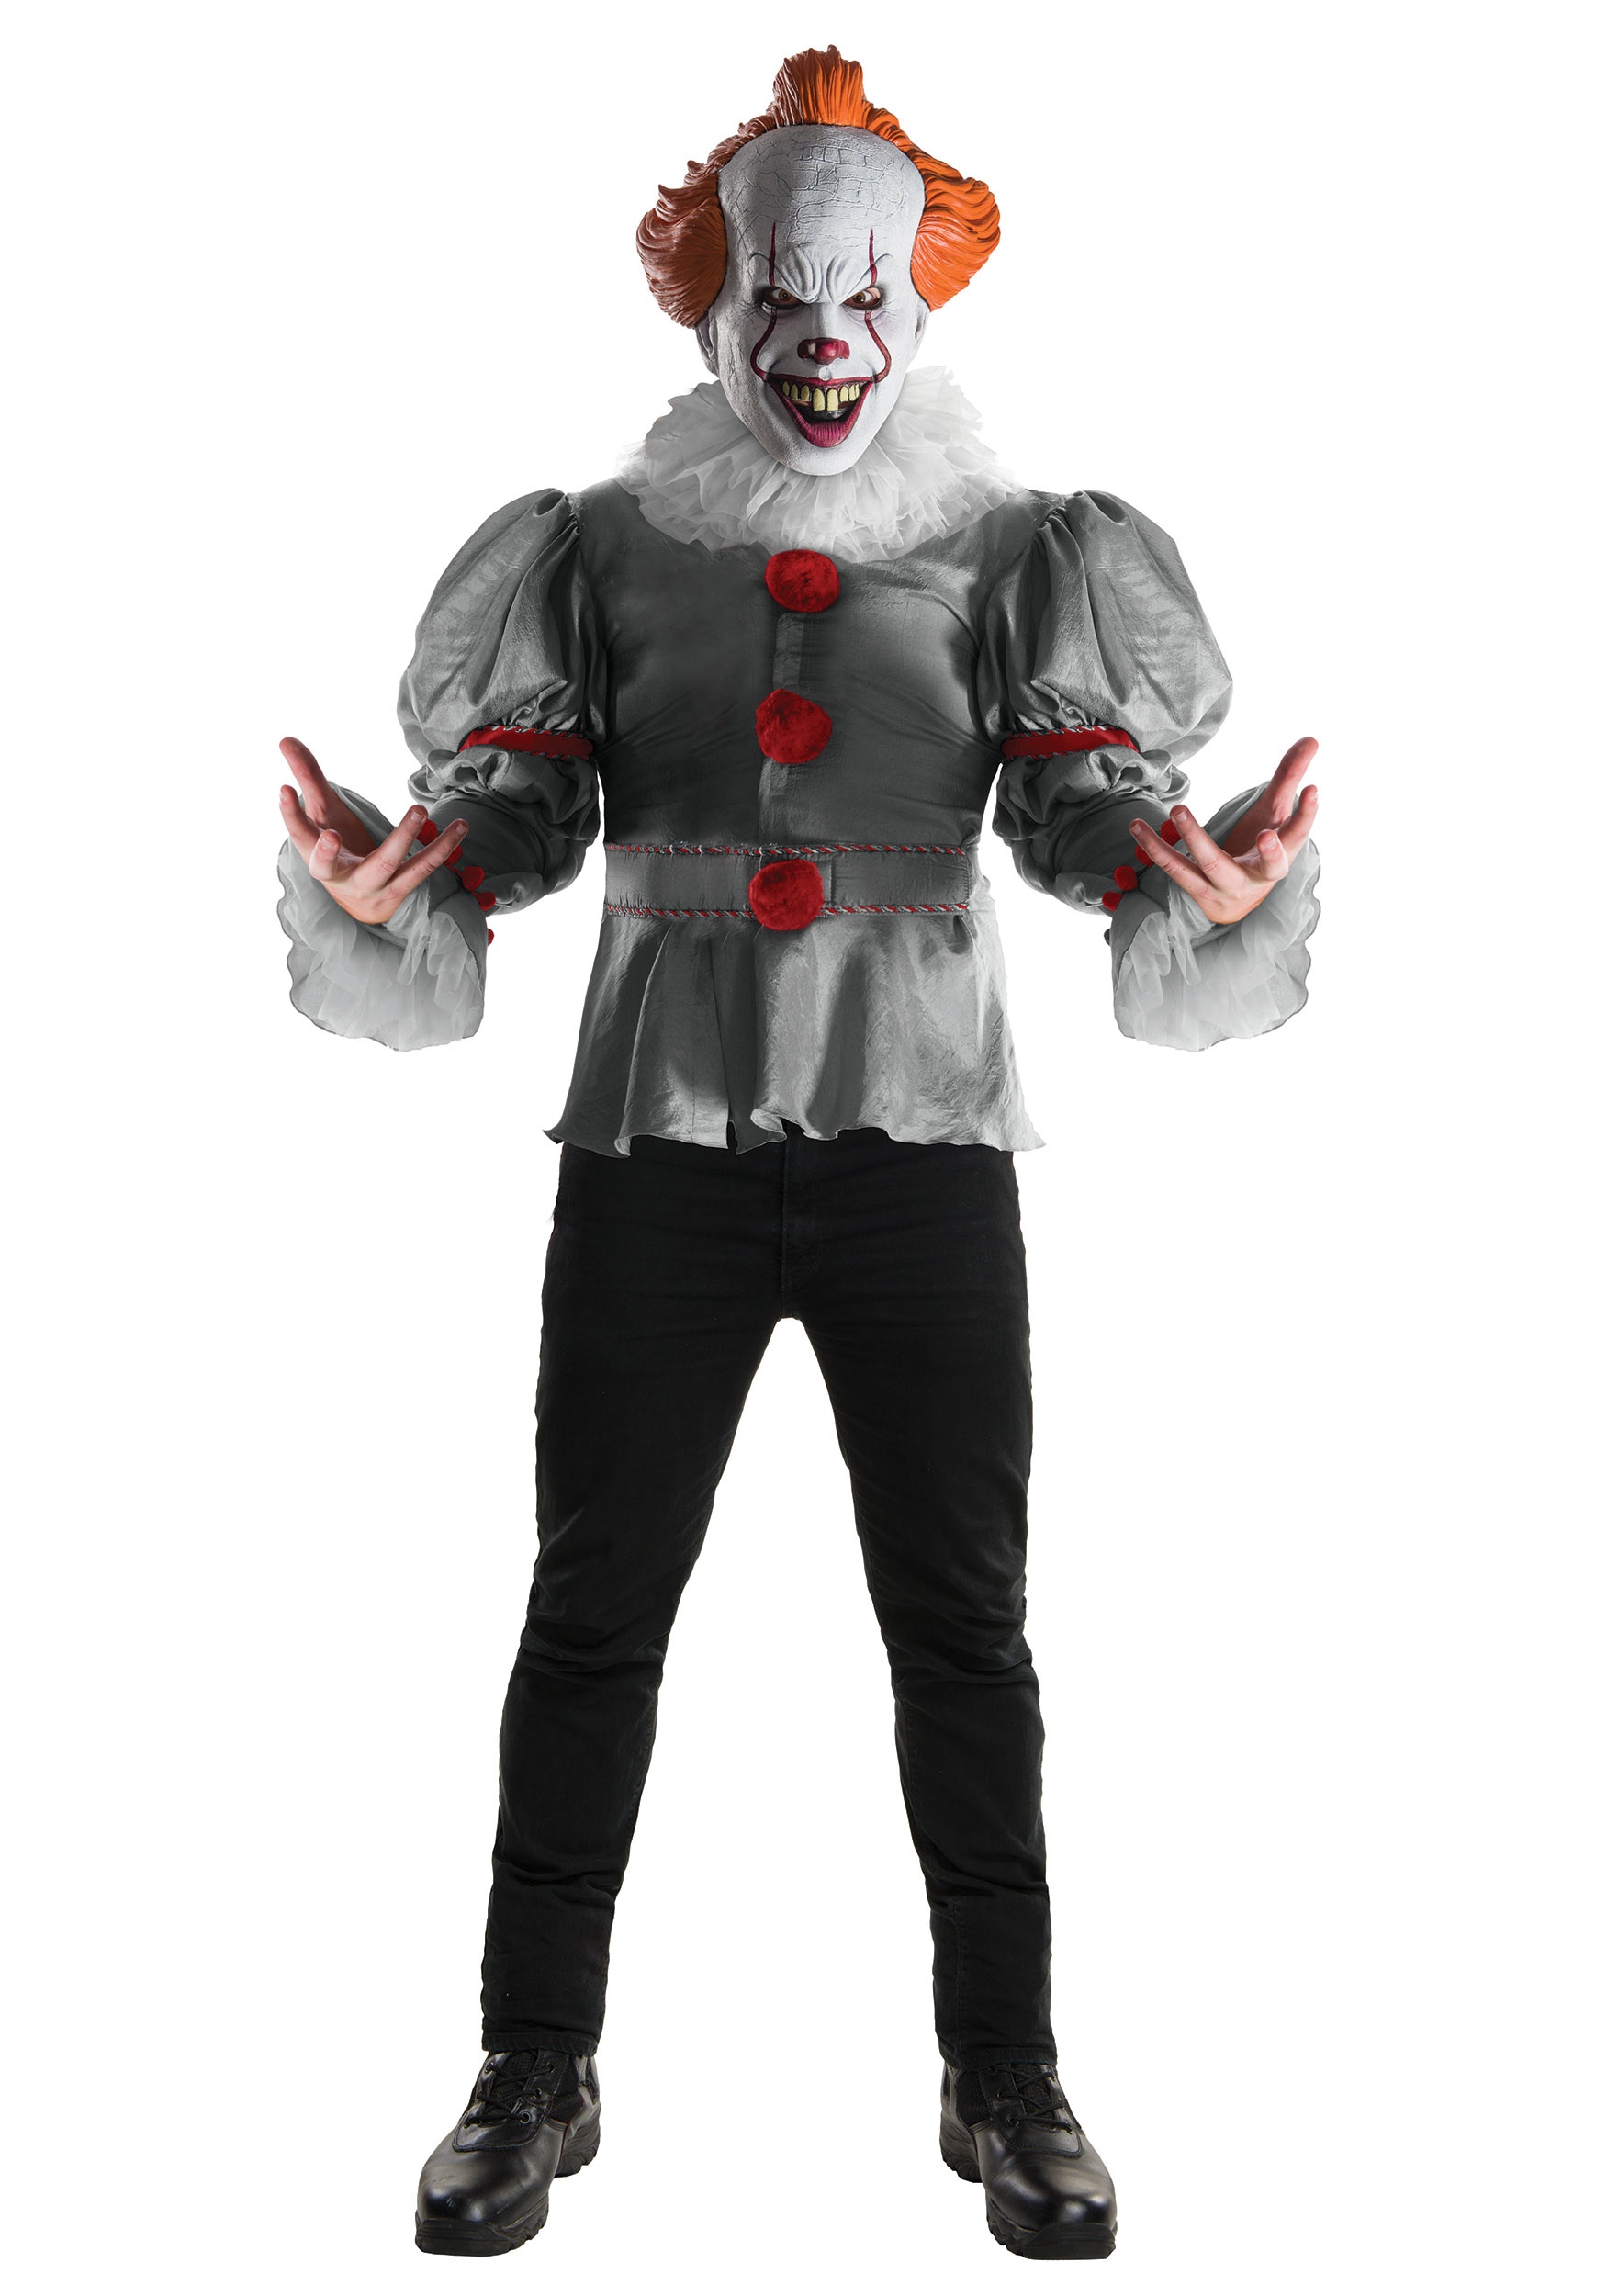 Image of Deluxe IT Movie Pennywise Costume for Adults ID RU820859-ST